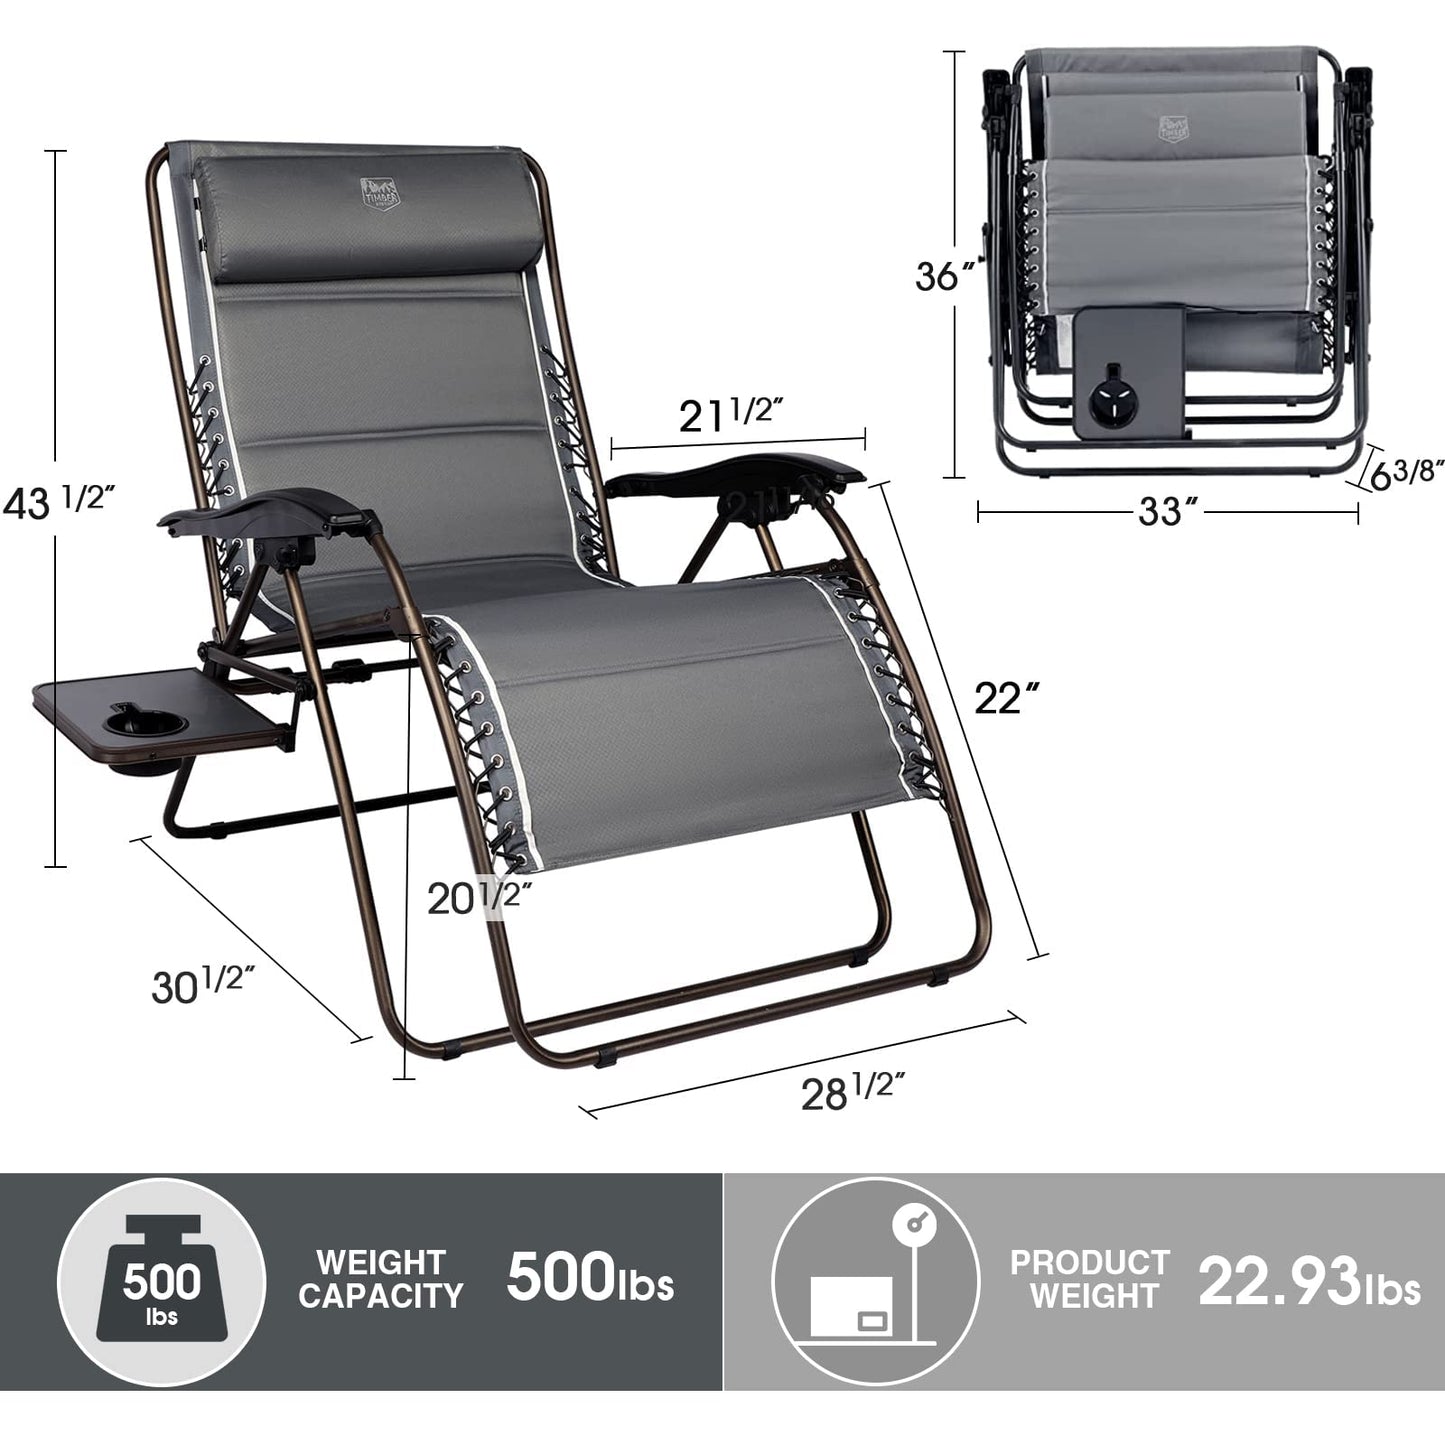 TIMBER RIDGE XXL Oversized Zero Gravity Chair, Full Padded Patio Lounger with Side Table, 33”Wide Reclining Lawn Chair, Support 500lbs(Gray) Grey-new